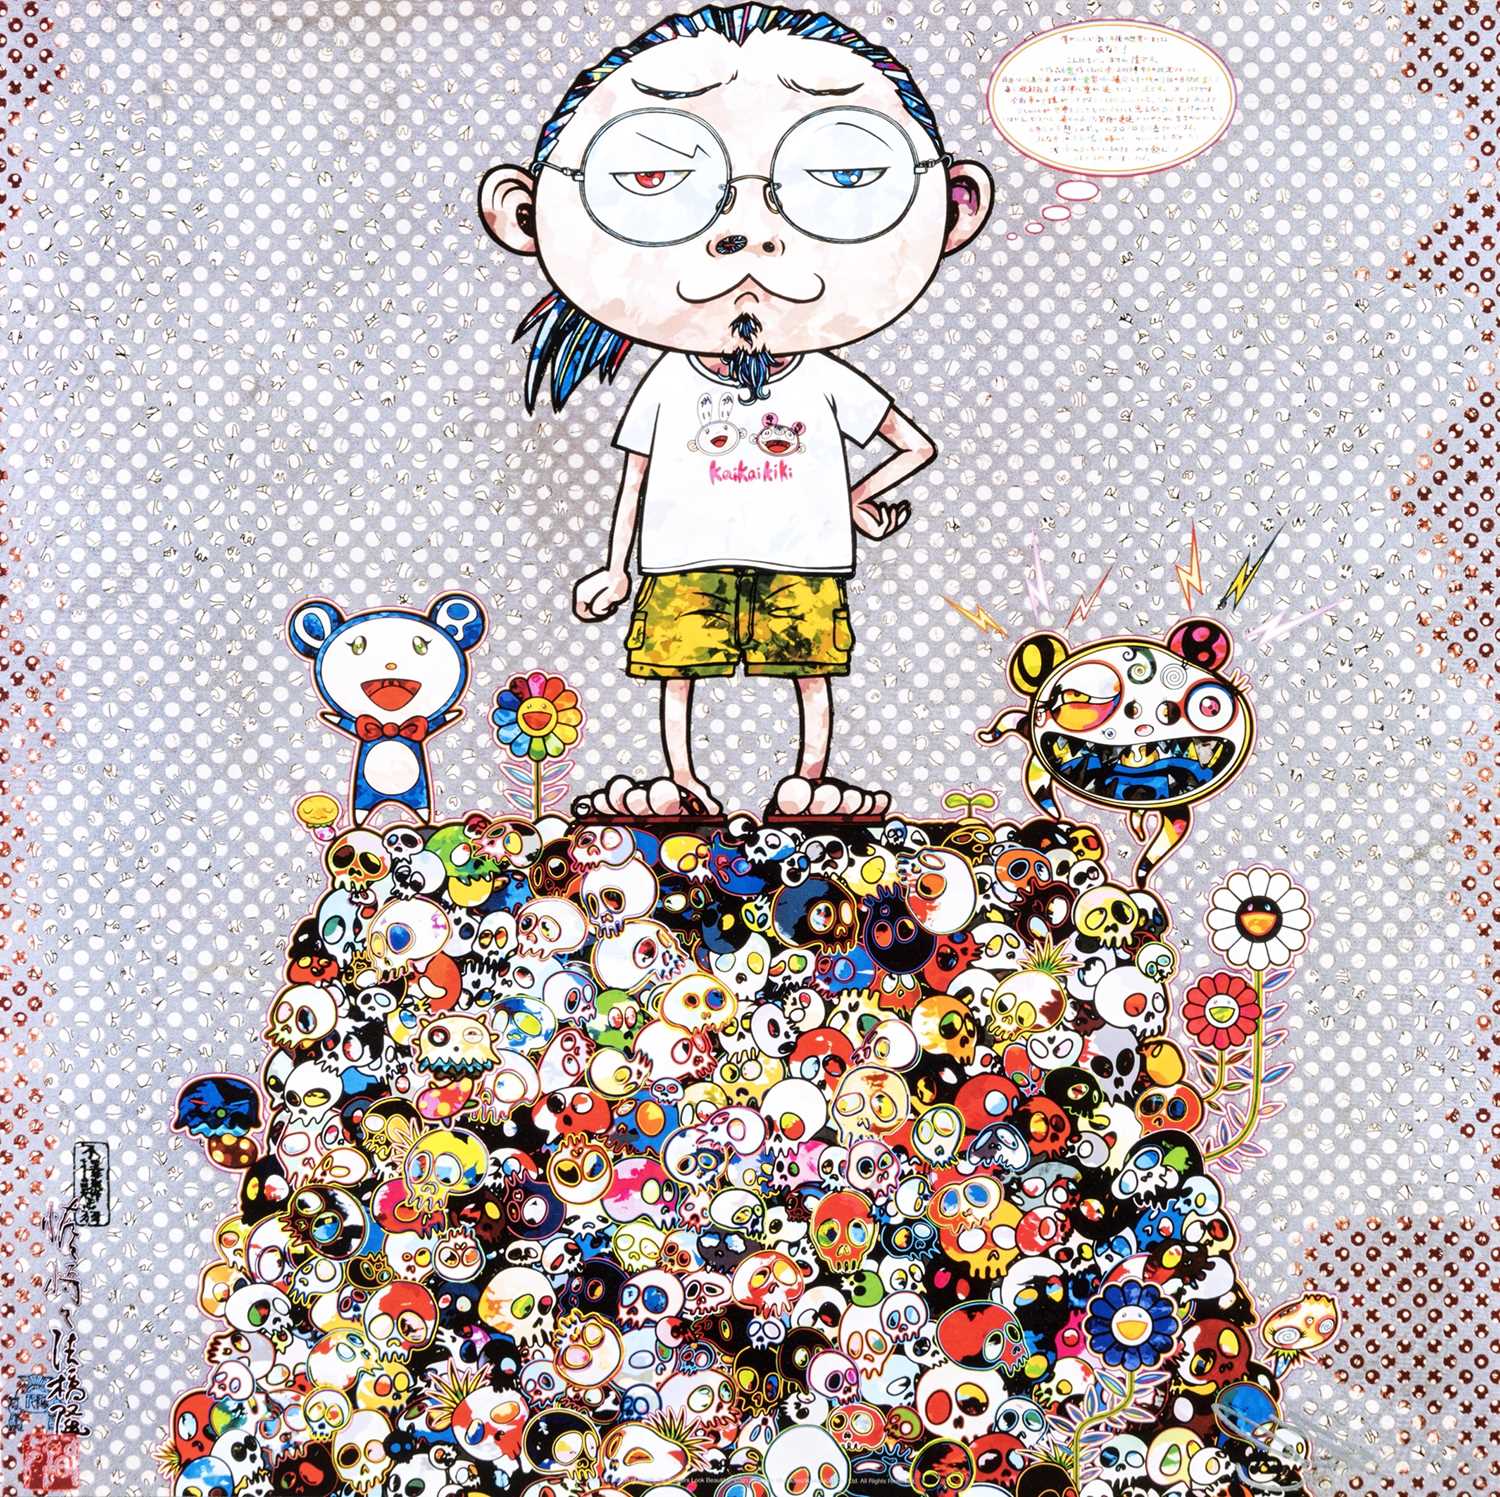 Lot 47 - Takashi Murakami (Japanese 1962-), 'With The Notion Of Death, The Flowers Look Beautiful', 2013